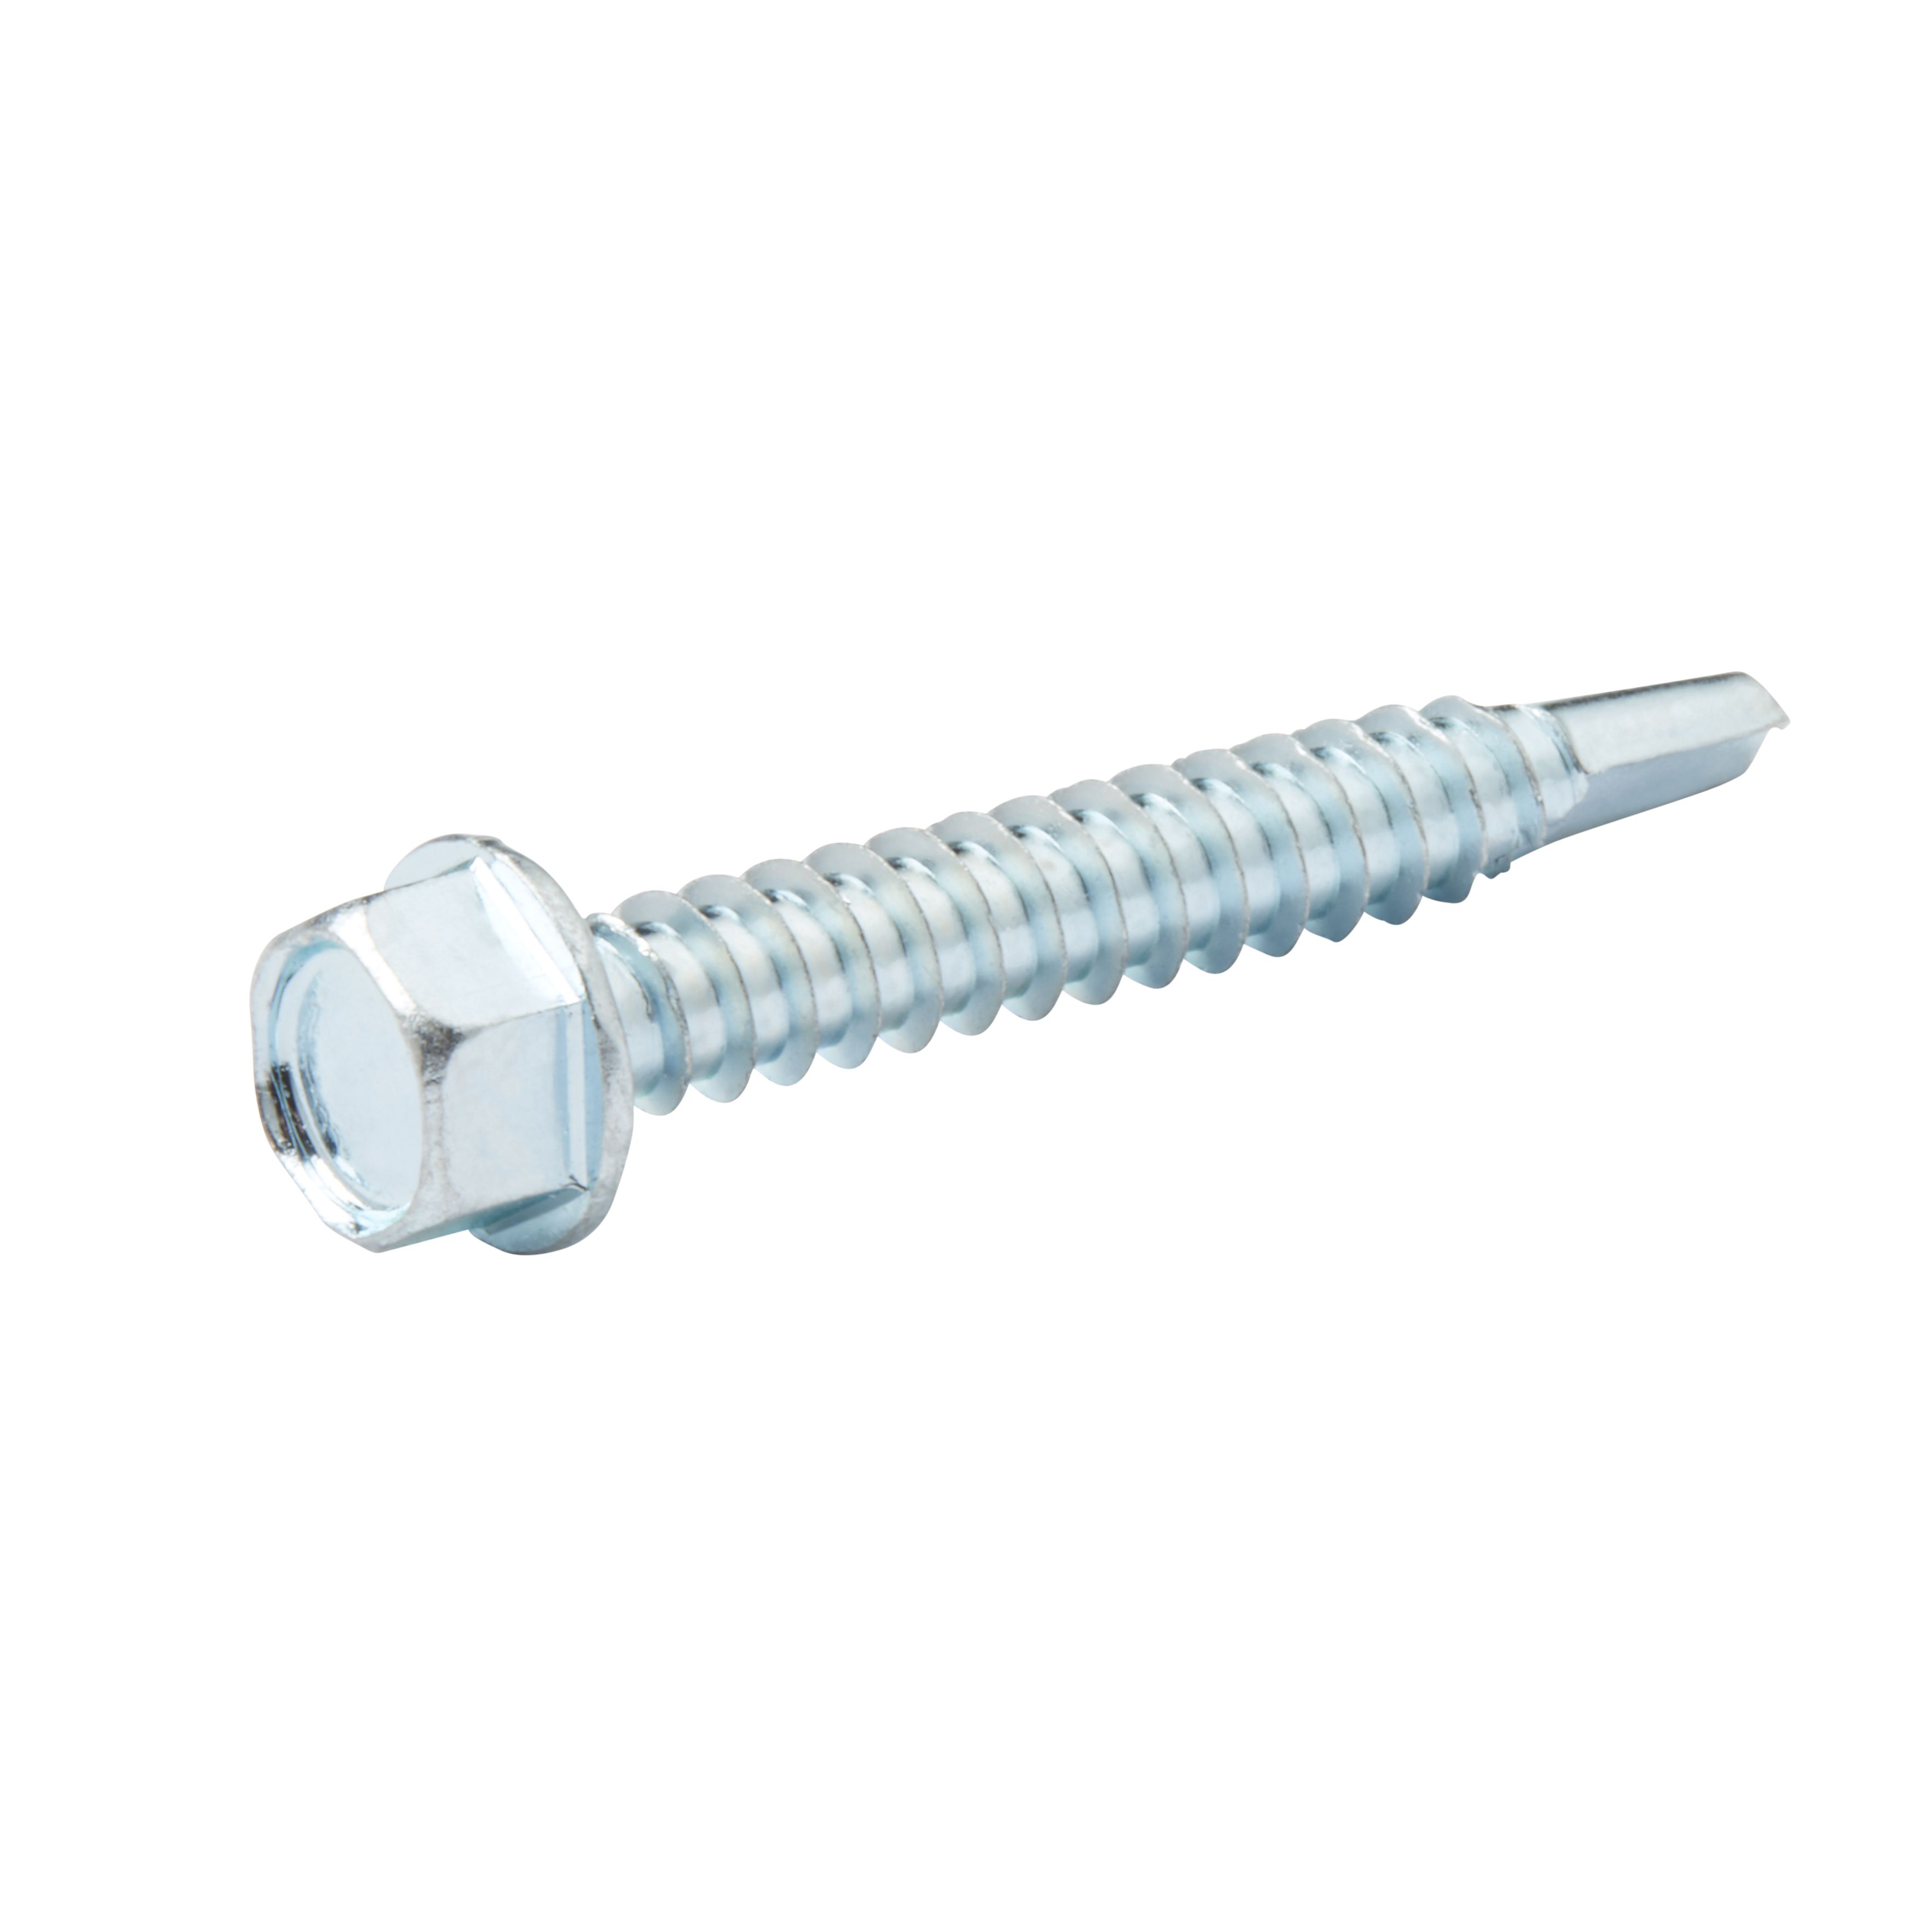 Diall Hex Zinc-plated Carbon steel Screw (Dia)5.5mm (L)38mm, Pack of 25